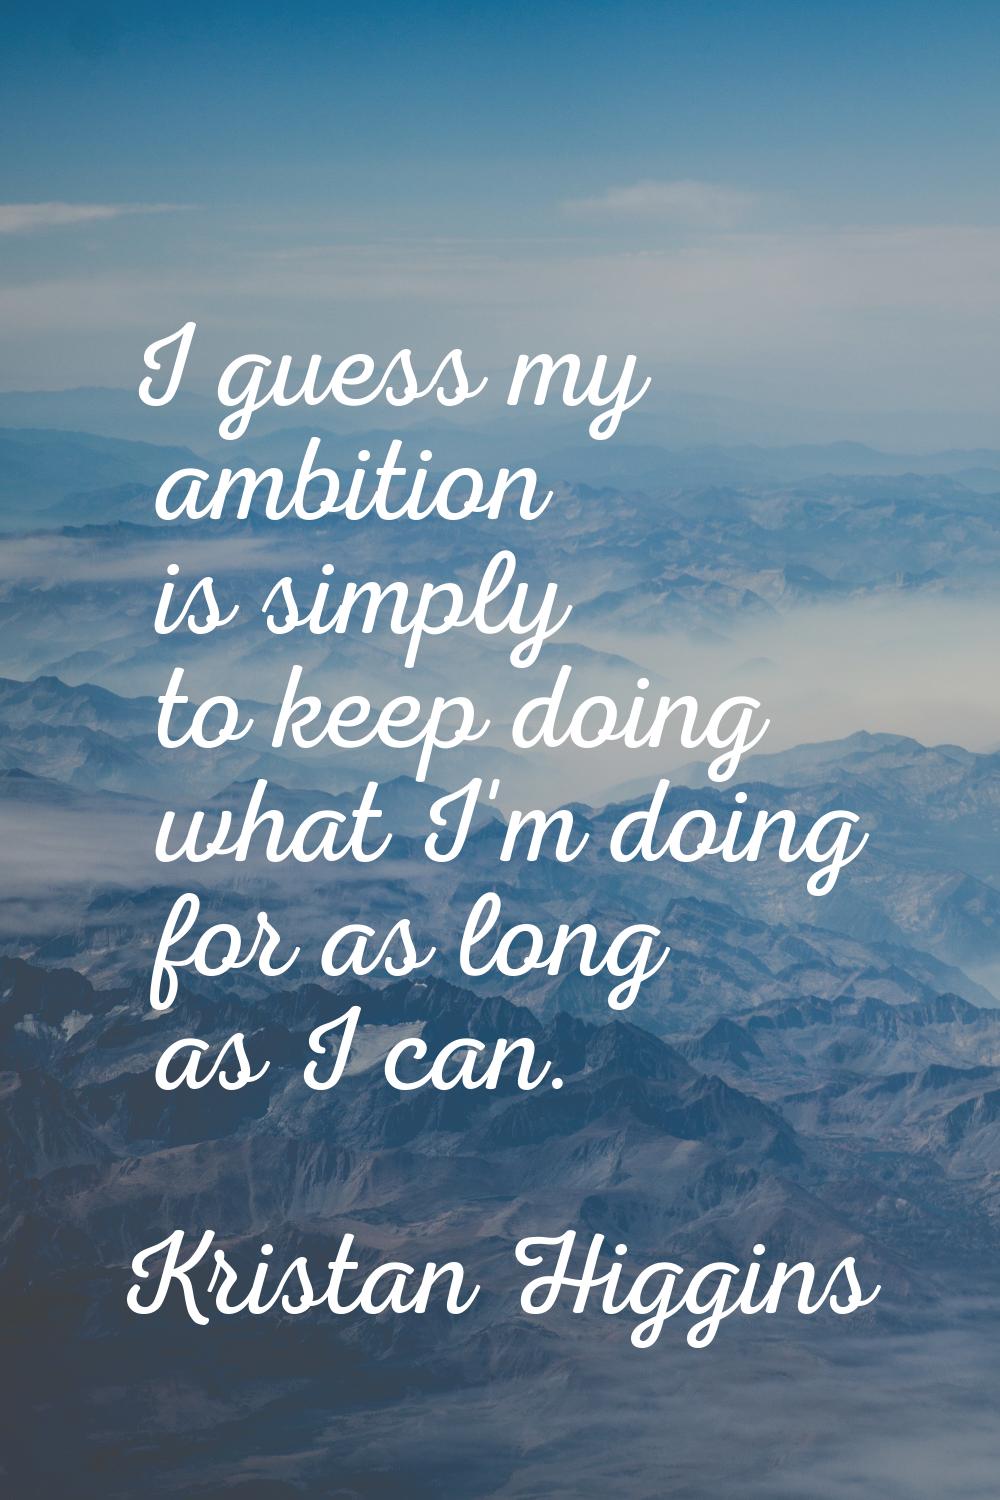 I guess my ambition is simply to keep doing what I'm doing for as long as I can.